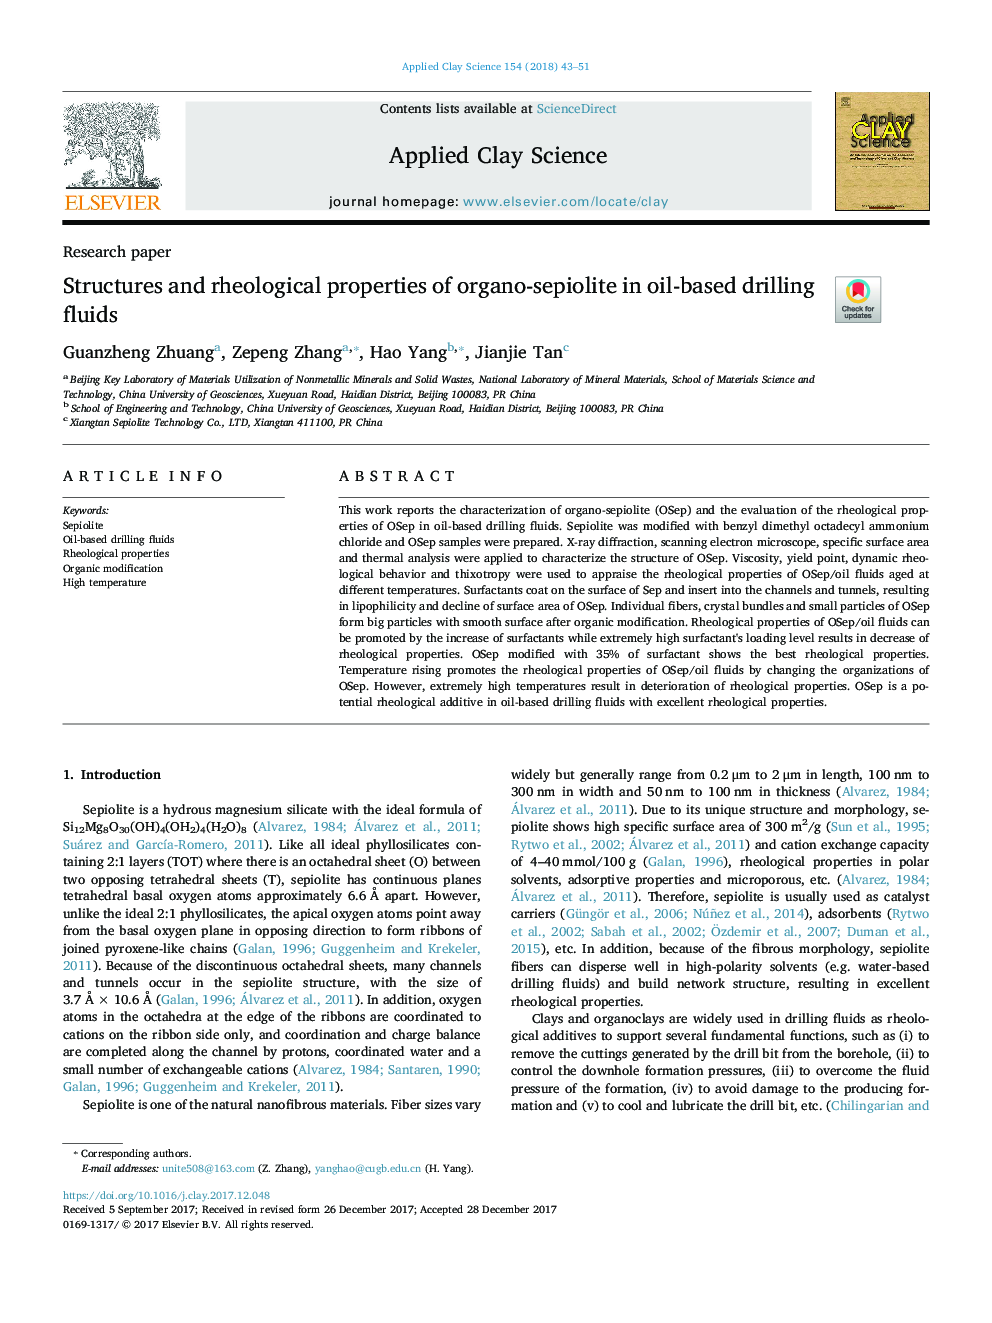 Structures and rheological properties of organo-sepiolite in oil-based drilling fluids